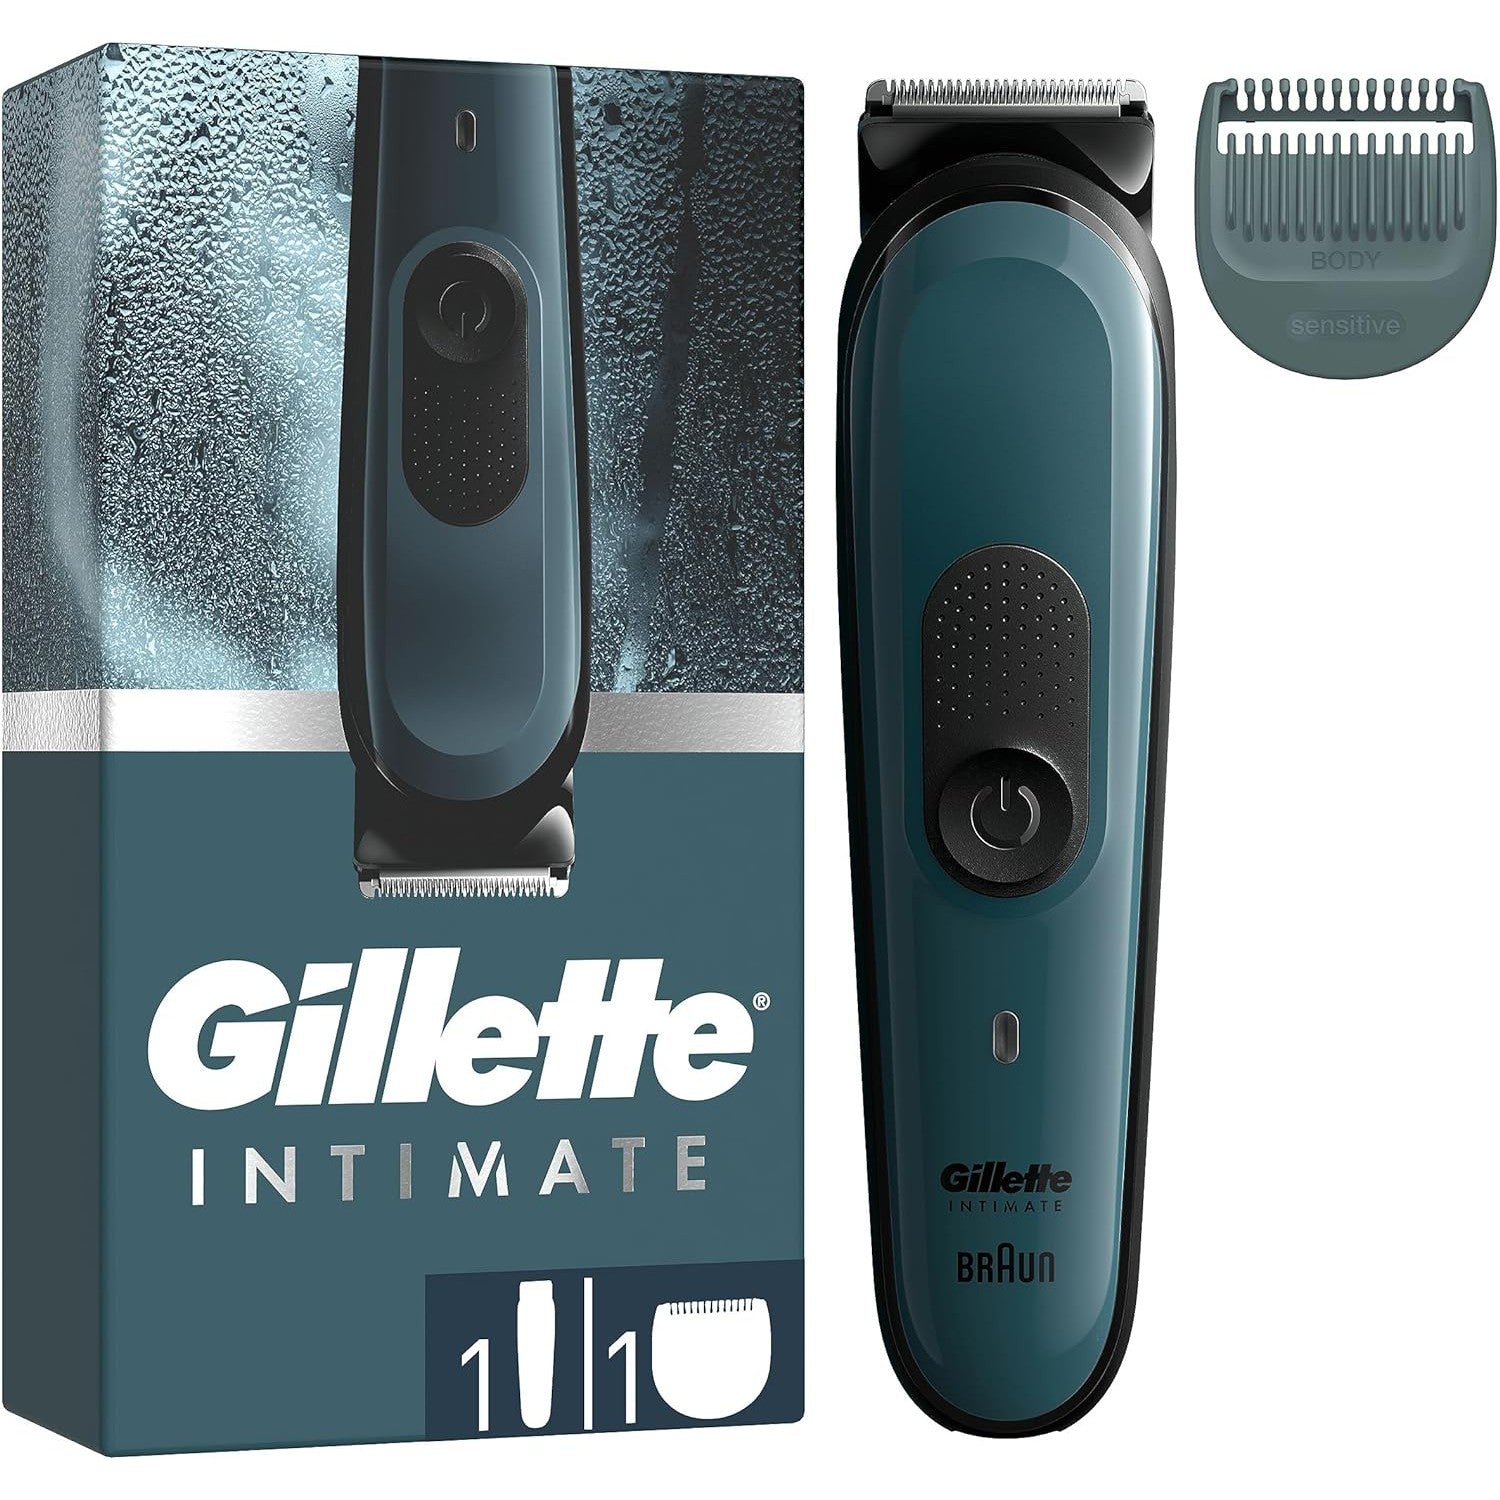 Gillette Intimate i3 Men’s Trimmer , SkinFirst Pubic Hair Trimmer for Men, Waterproof, Cordless - Wet & Dry